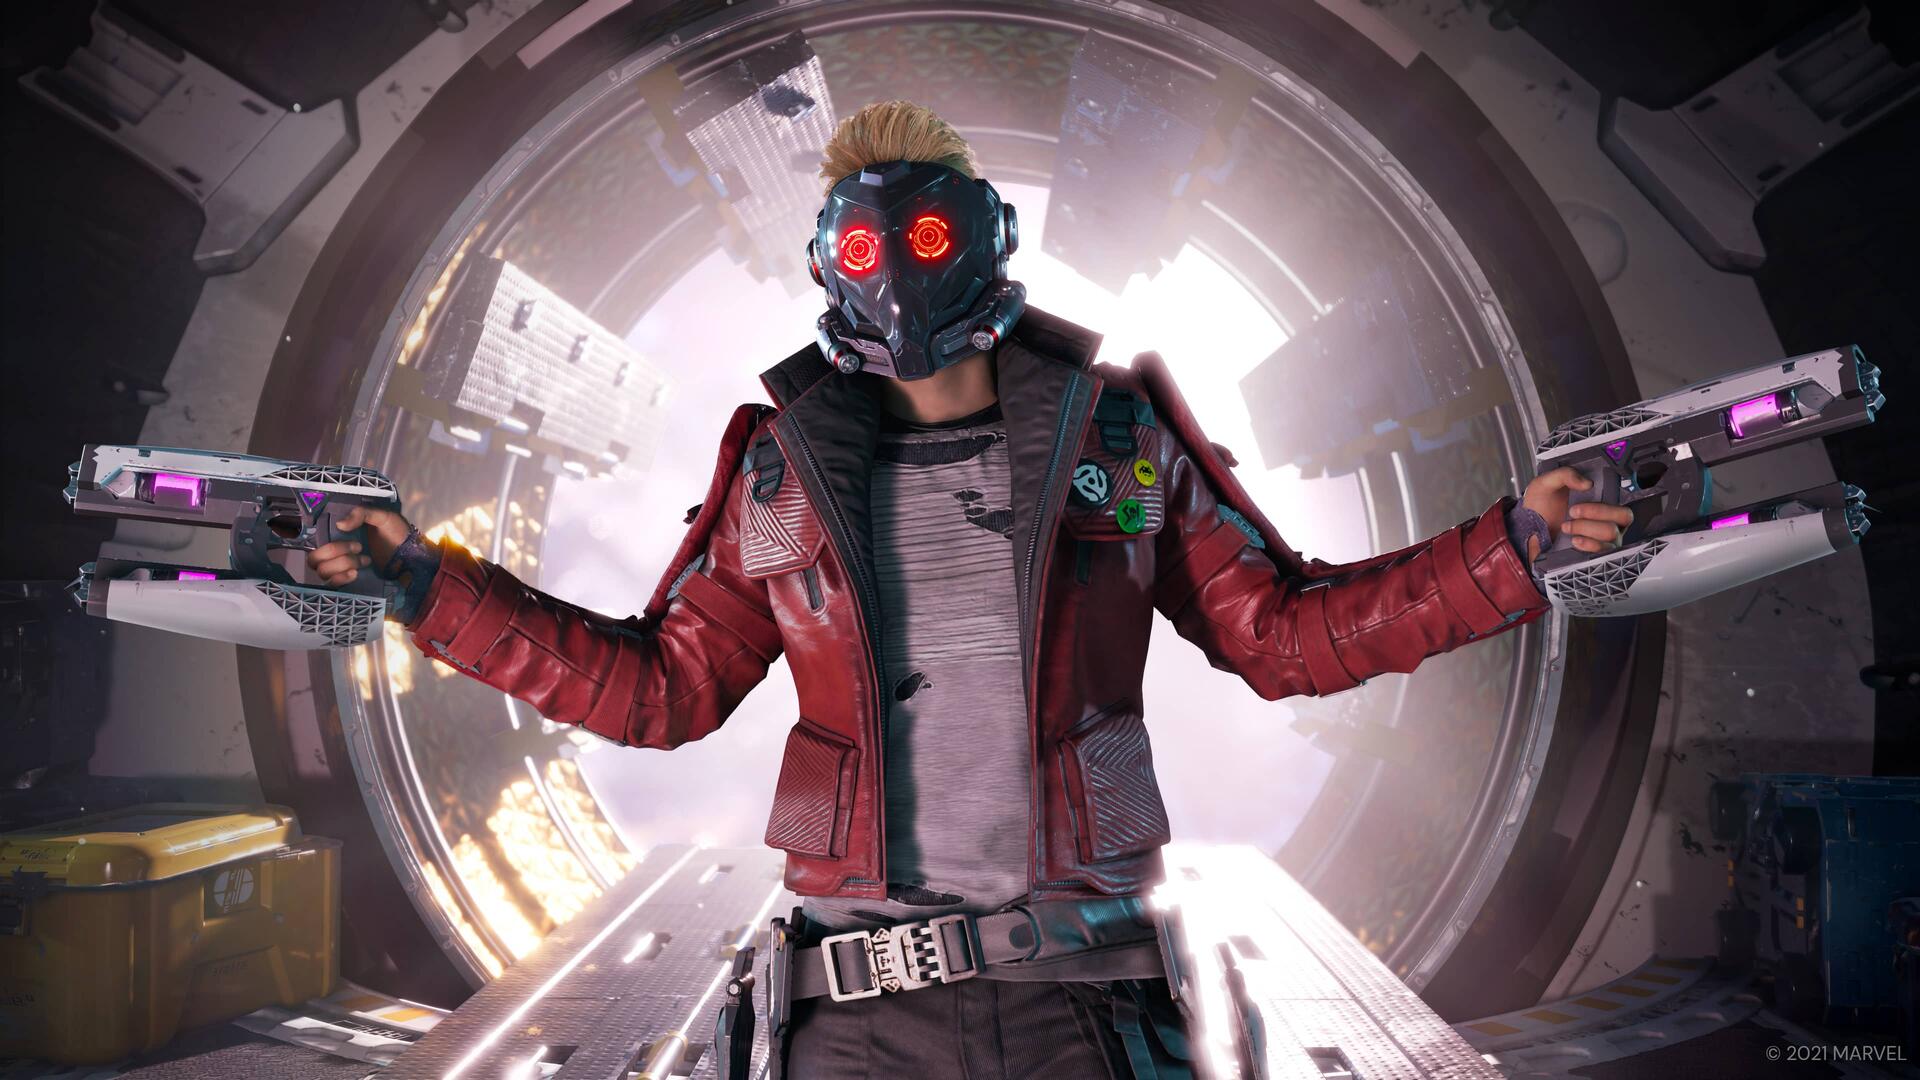 Star-Lord Band